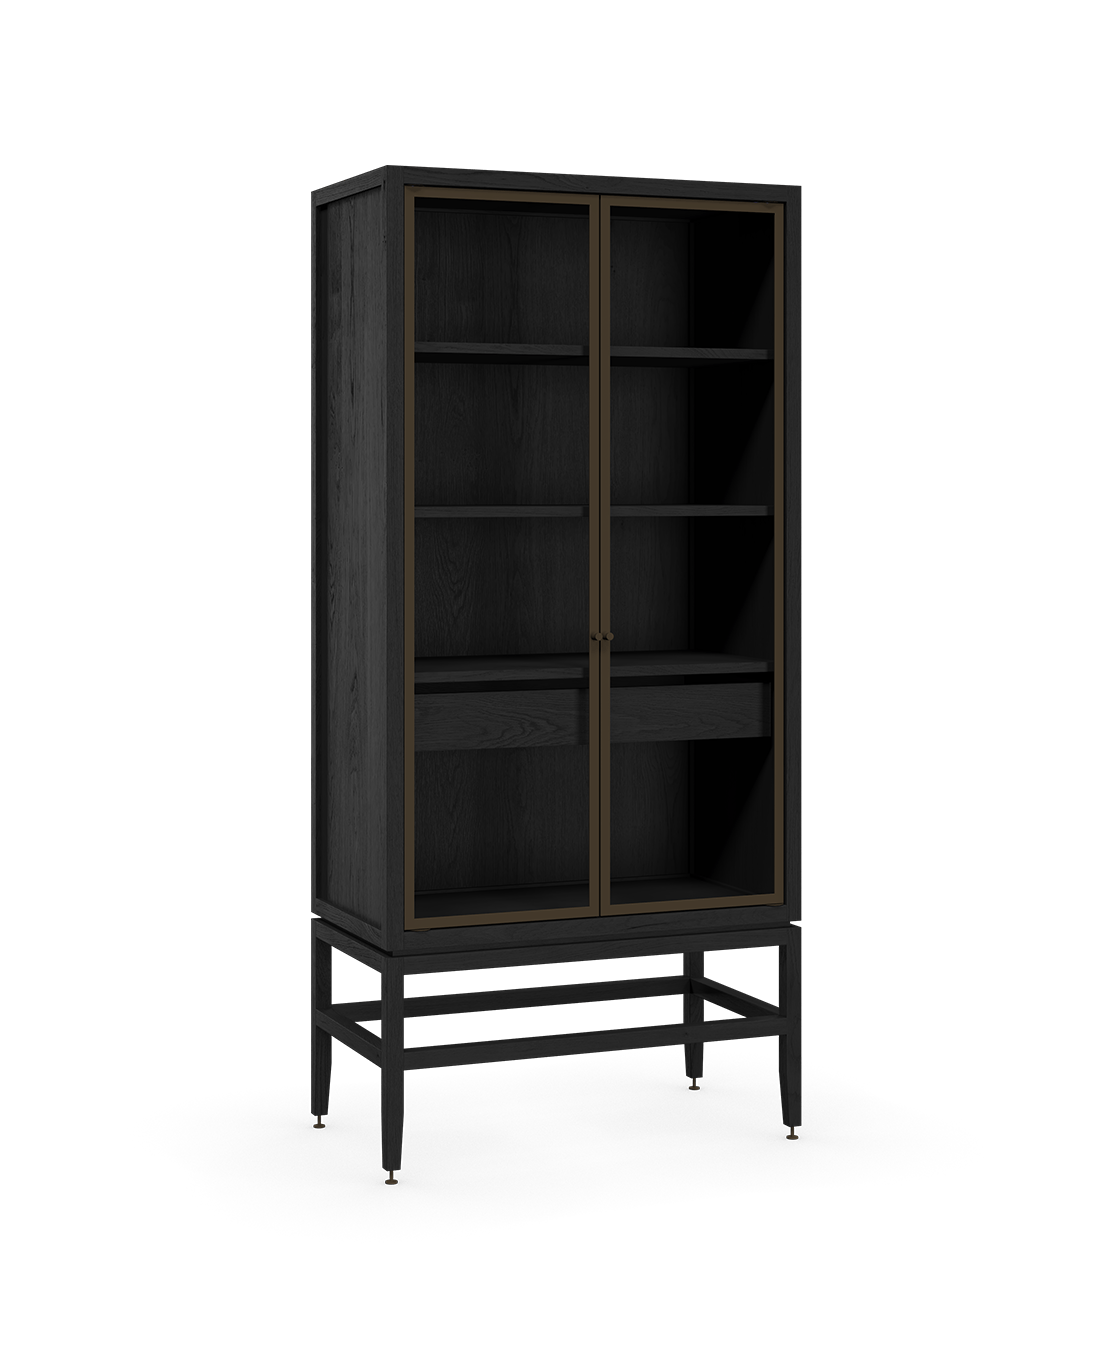 Coquo freestanding modular display hutch in black stained oak with glass doors. Perfect for the kitchen, dining, bedroom or living room. 